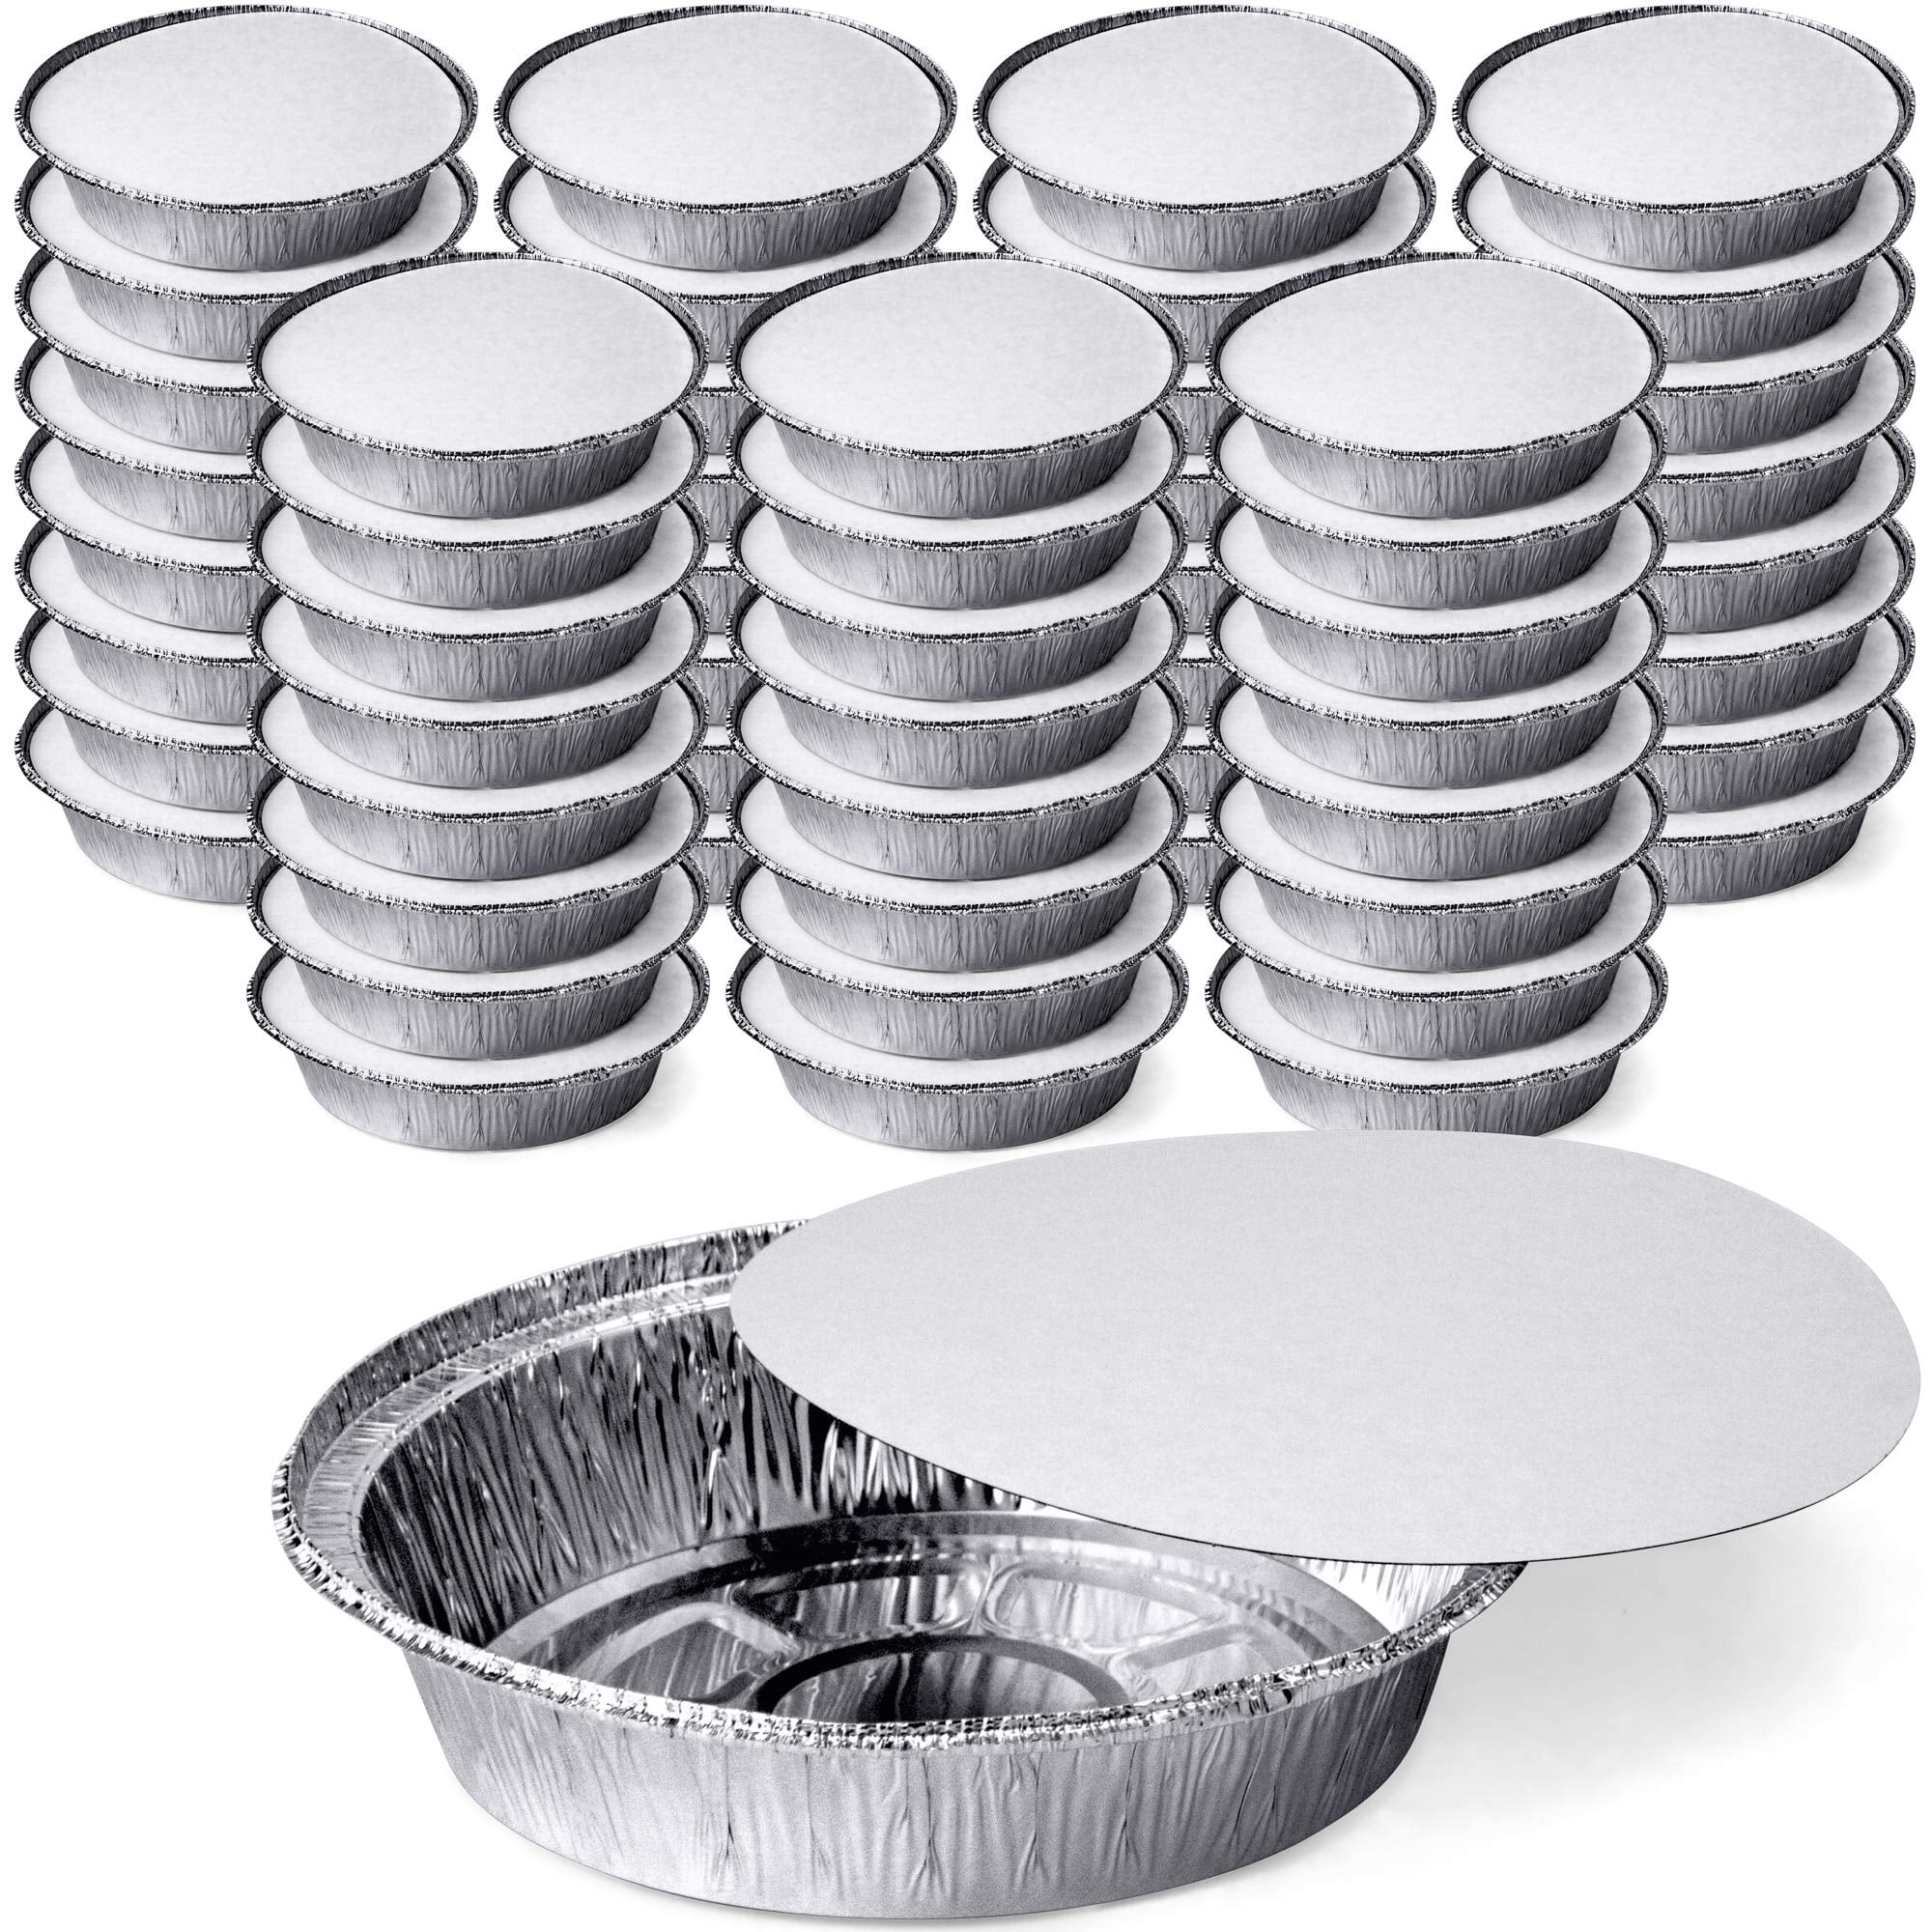 DecorRack 56 Round Aluminum Pans with Flat Board Lid, 7 inch Heavy Duty  Take-Out Containers - Walmart.com